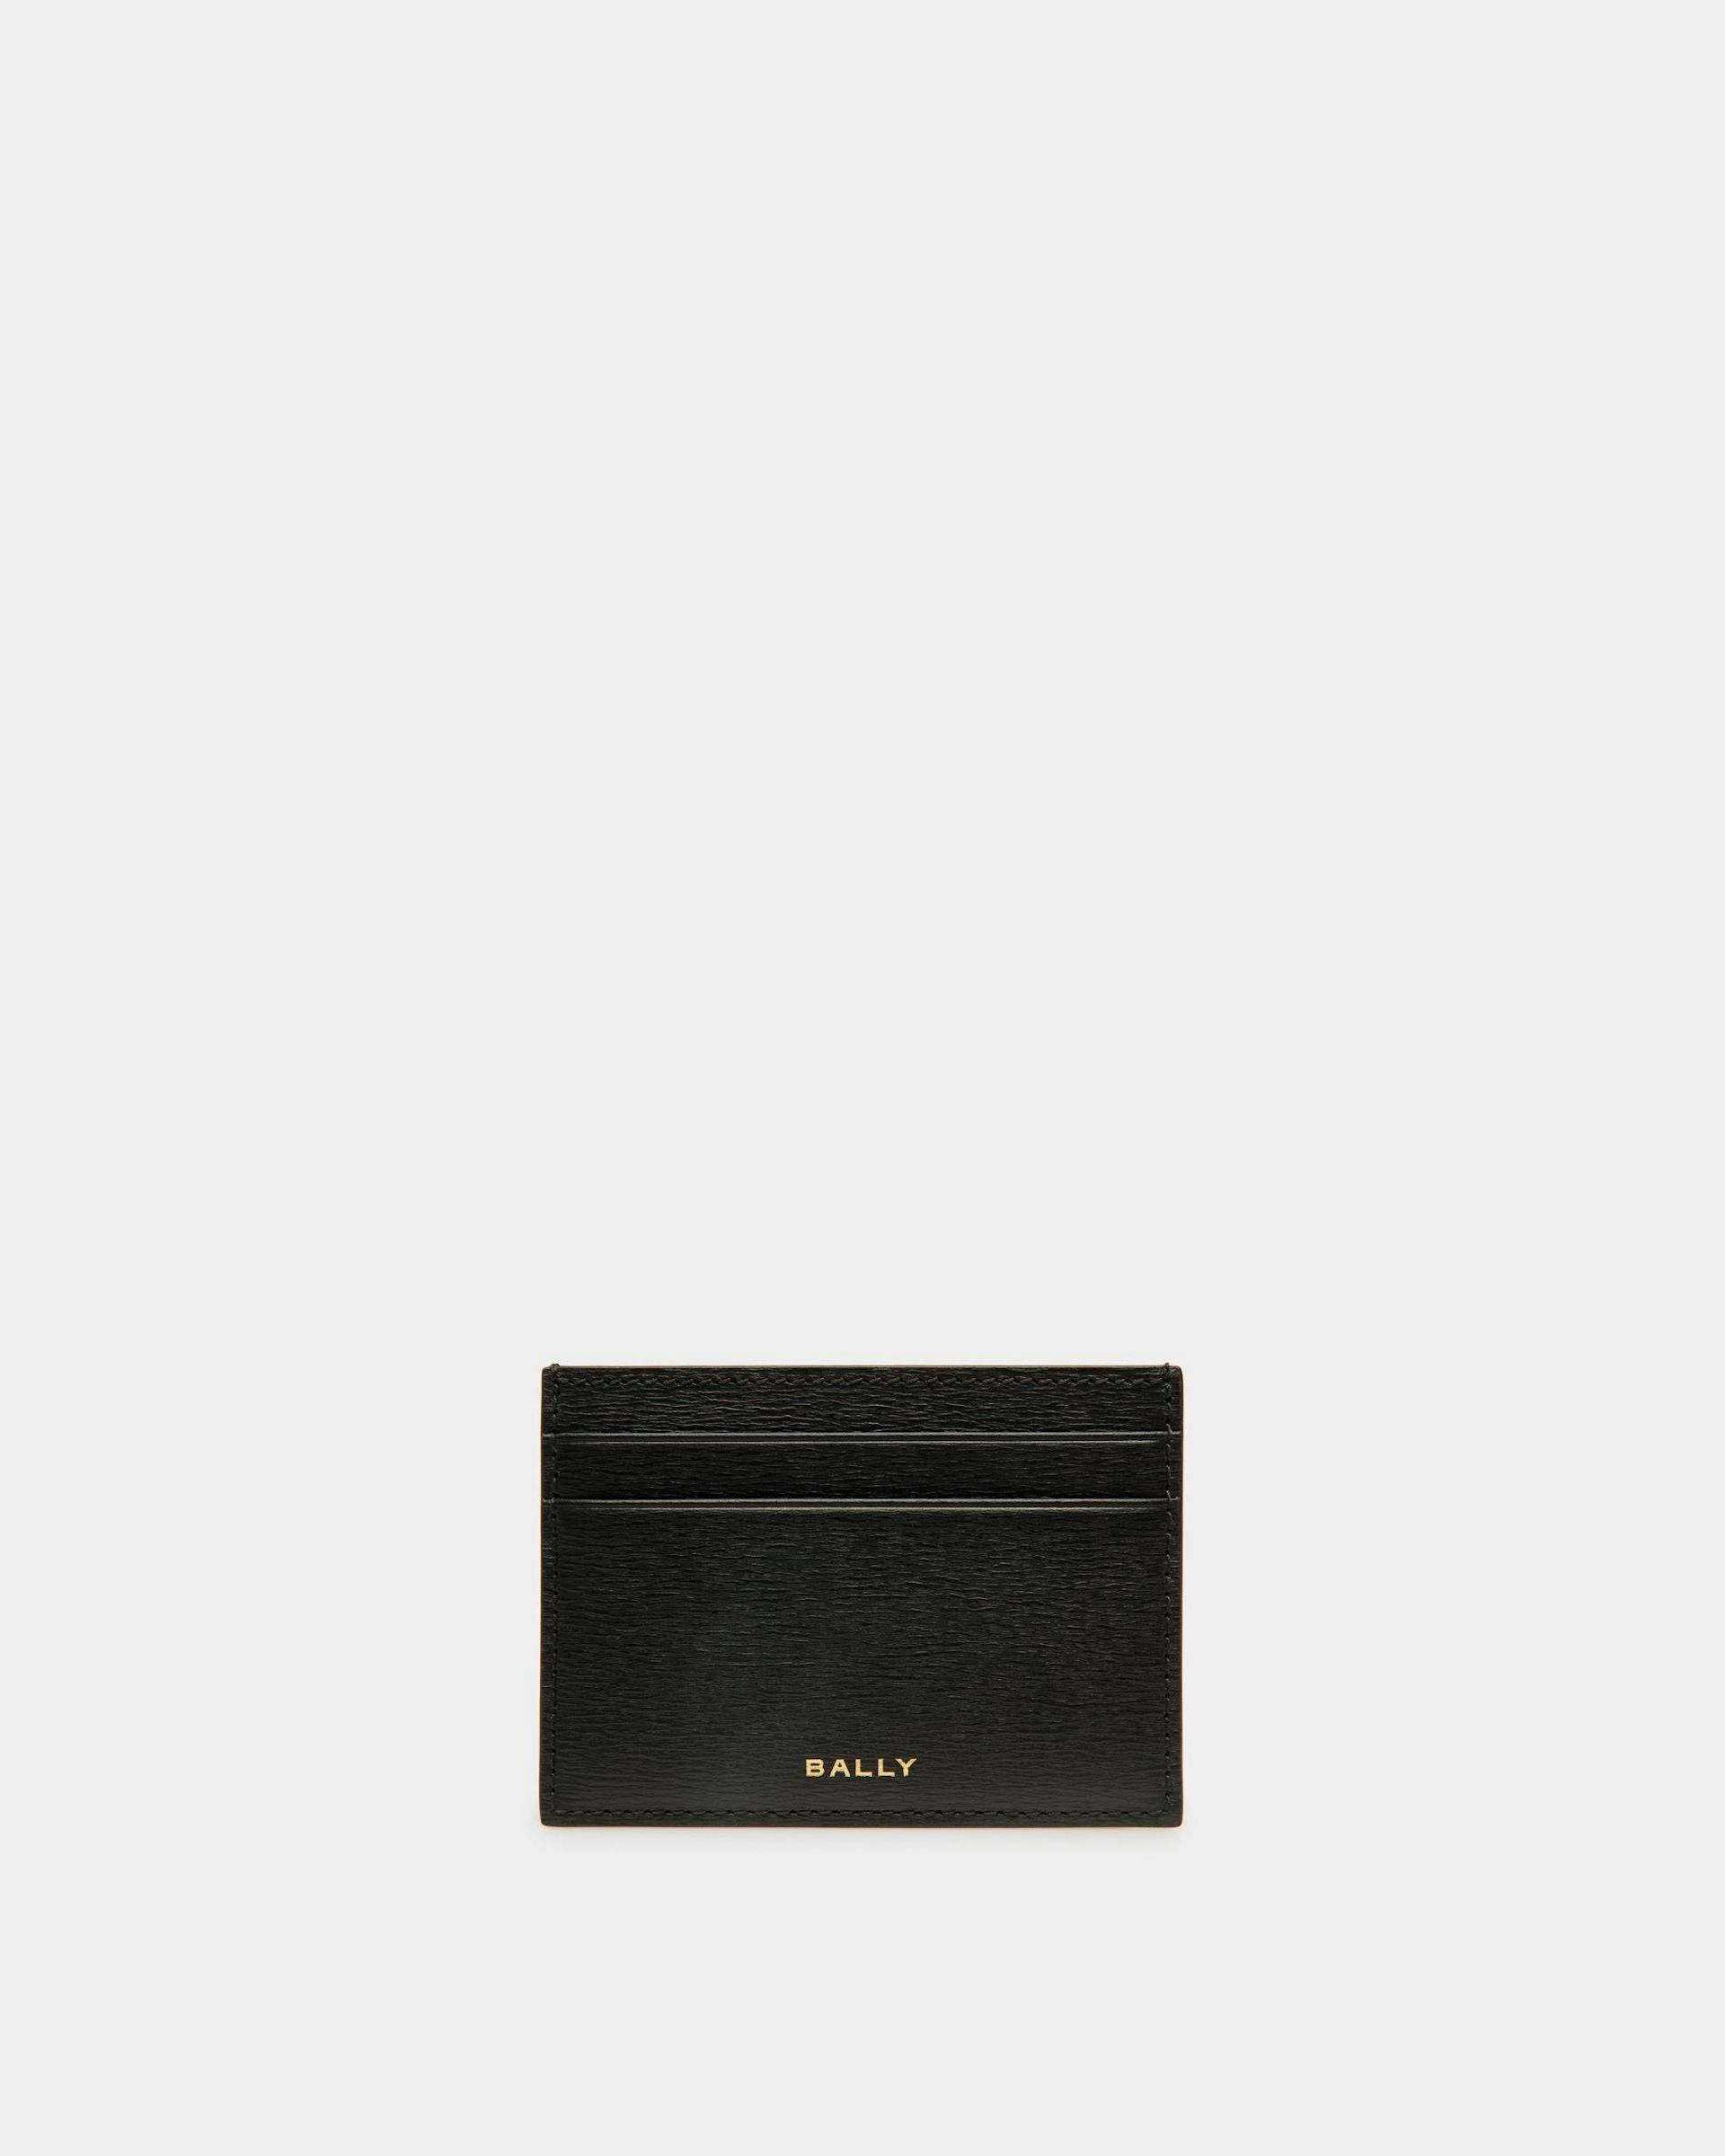 Men's Cny Card Holder In Black And Red Grained Leather | Bally | Still Life Front